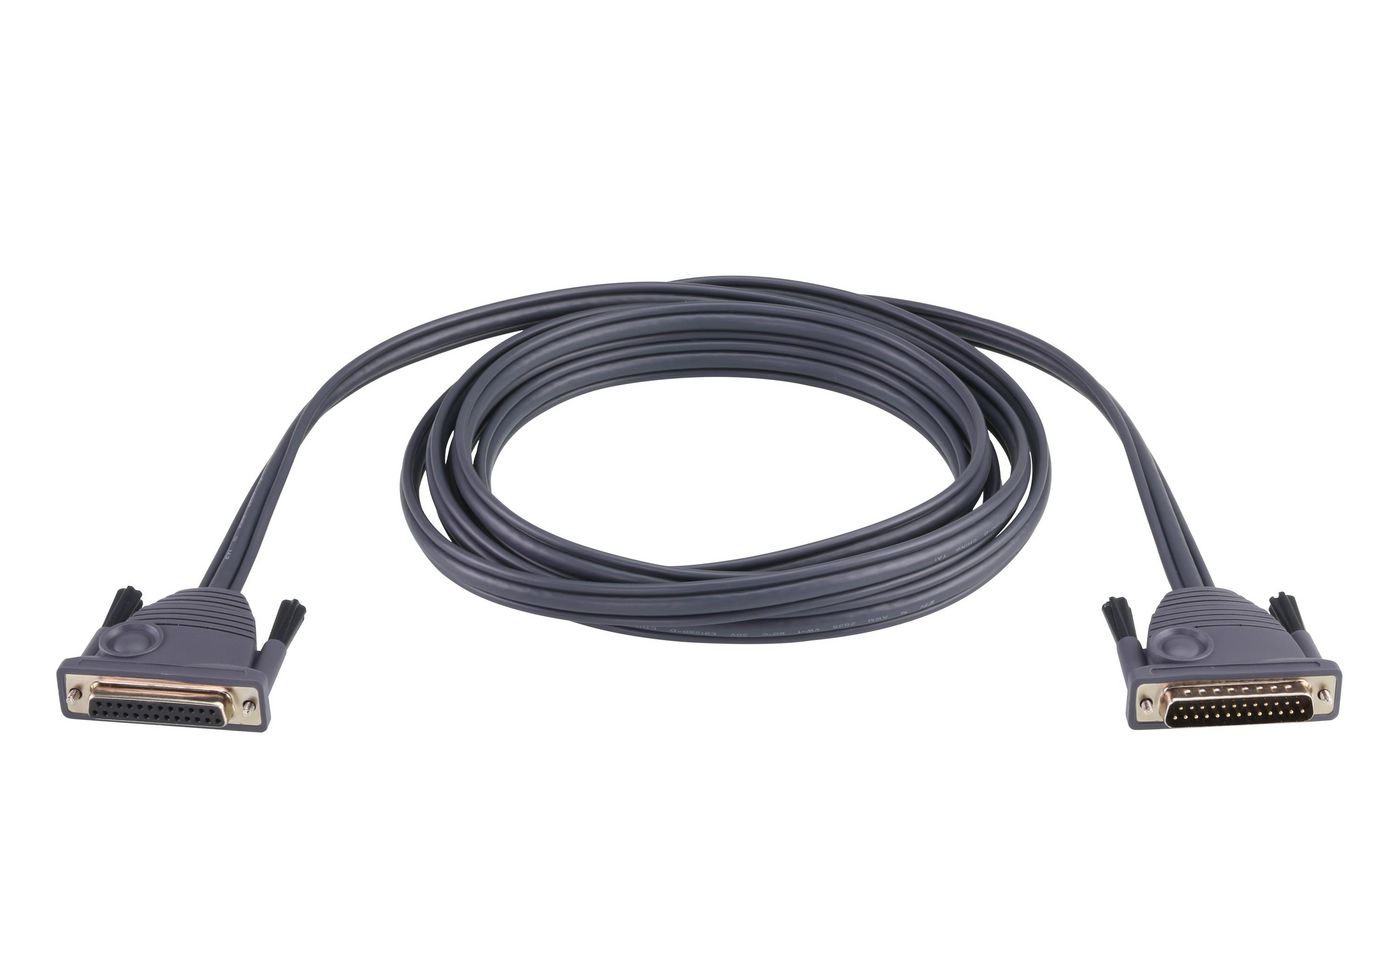 ATEN KVM cable 5.0m Daisy Chain Cable